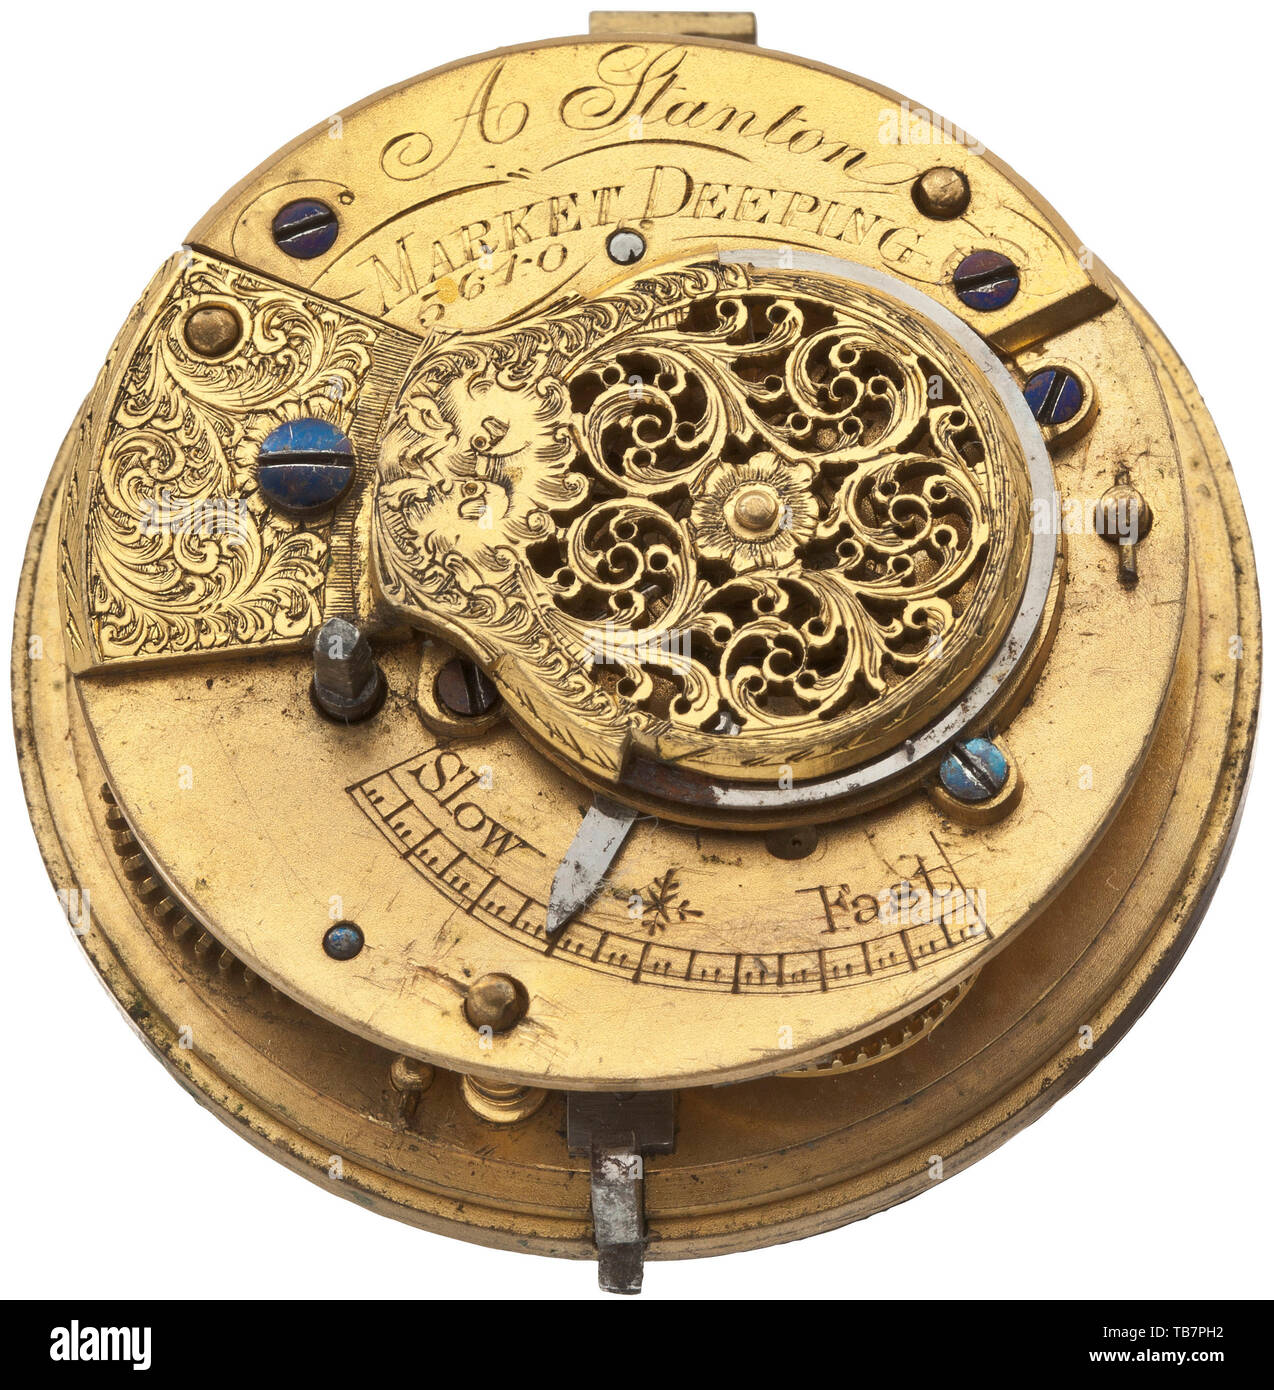 A golden verge pocket watch with outer case, A. Stanton, London, circa 1800, Gold case with multiple stamps. Signed plate movement with round movement pillars. Chain/snail with finely pierced balance bridge. Enamel face with Roman numerals. Clock in functioning order. Diameter 5.7 cm, weight of the outer case 53.5 g, overall weight 173 g. historic, historical 19th century, Additional-Rights-Clearance-Info-Not-Available Stock Photo